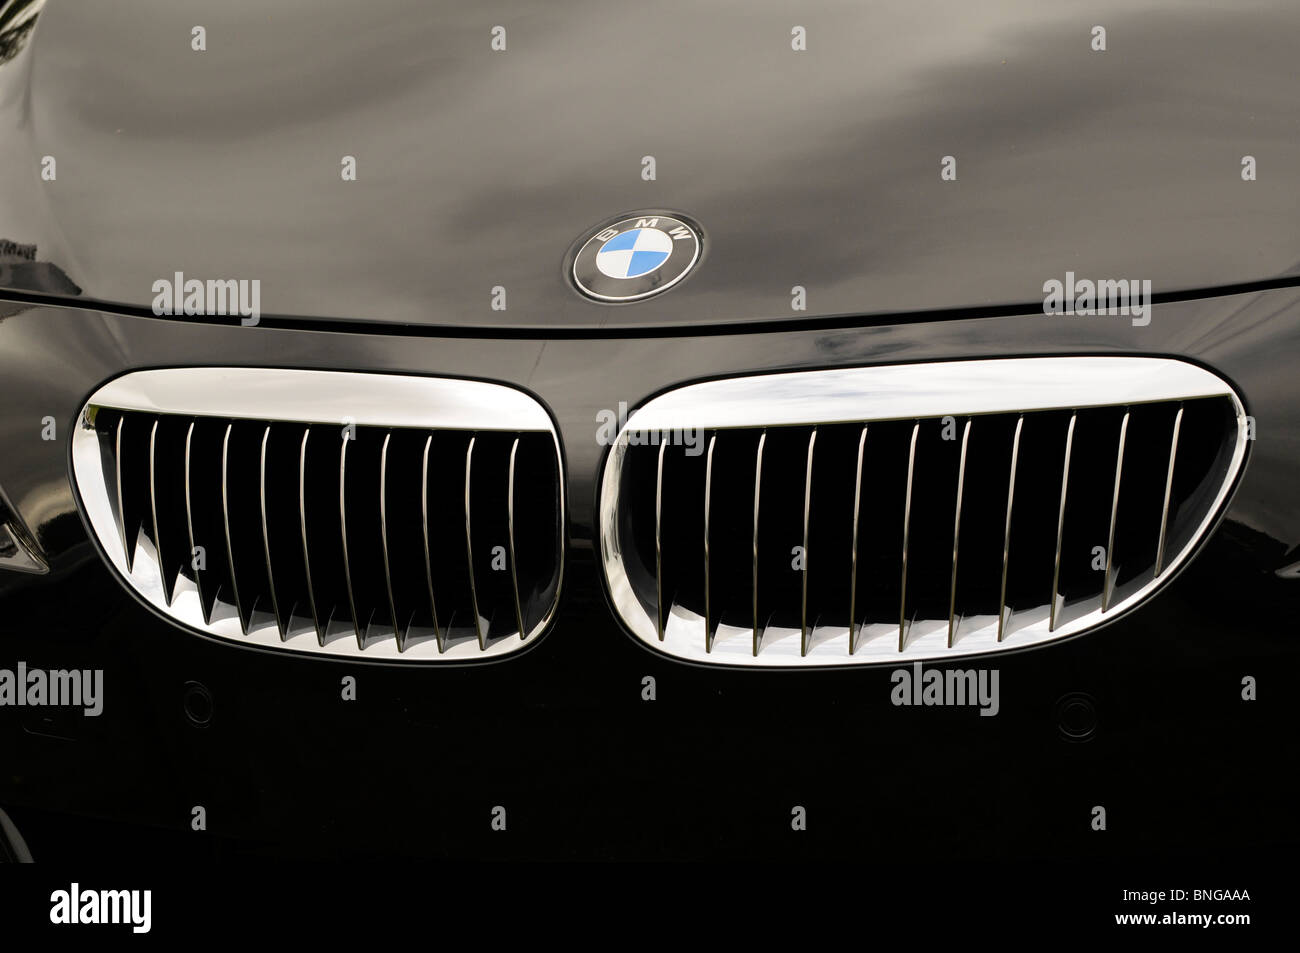 Radiator Grill Car: Over 9,462 Royalty-Free Licensable Stock Photos